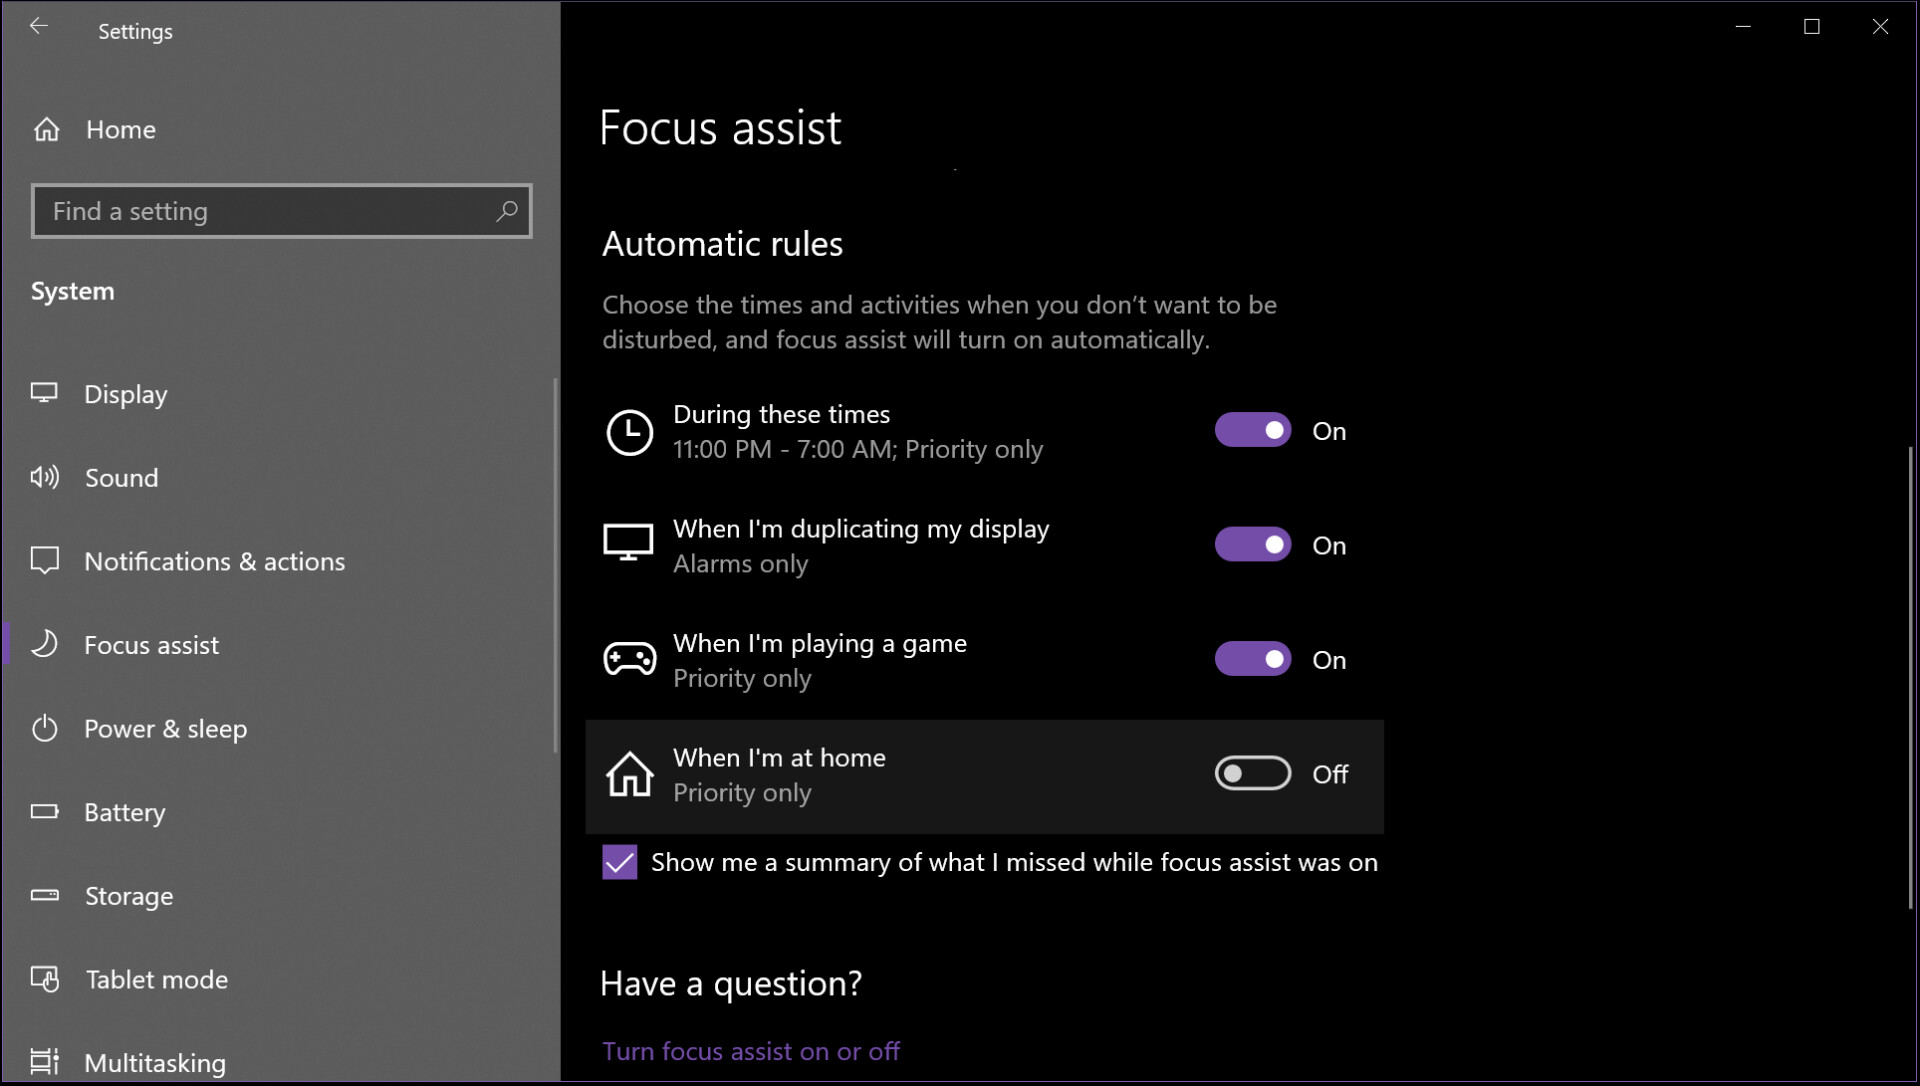 Windows 10 Focus assist automatic rules - How to use notifications in Windows 10